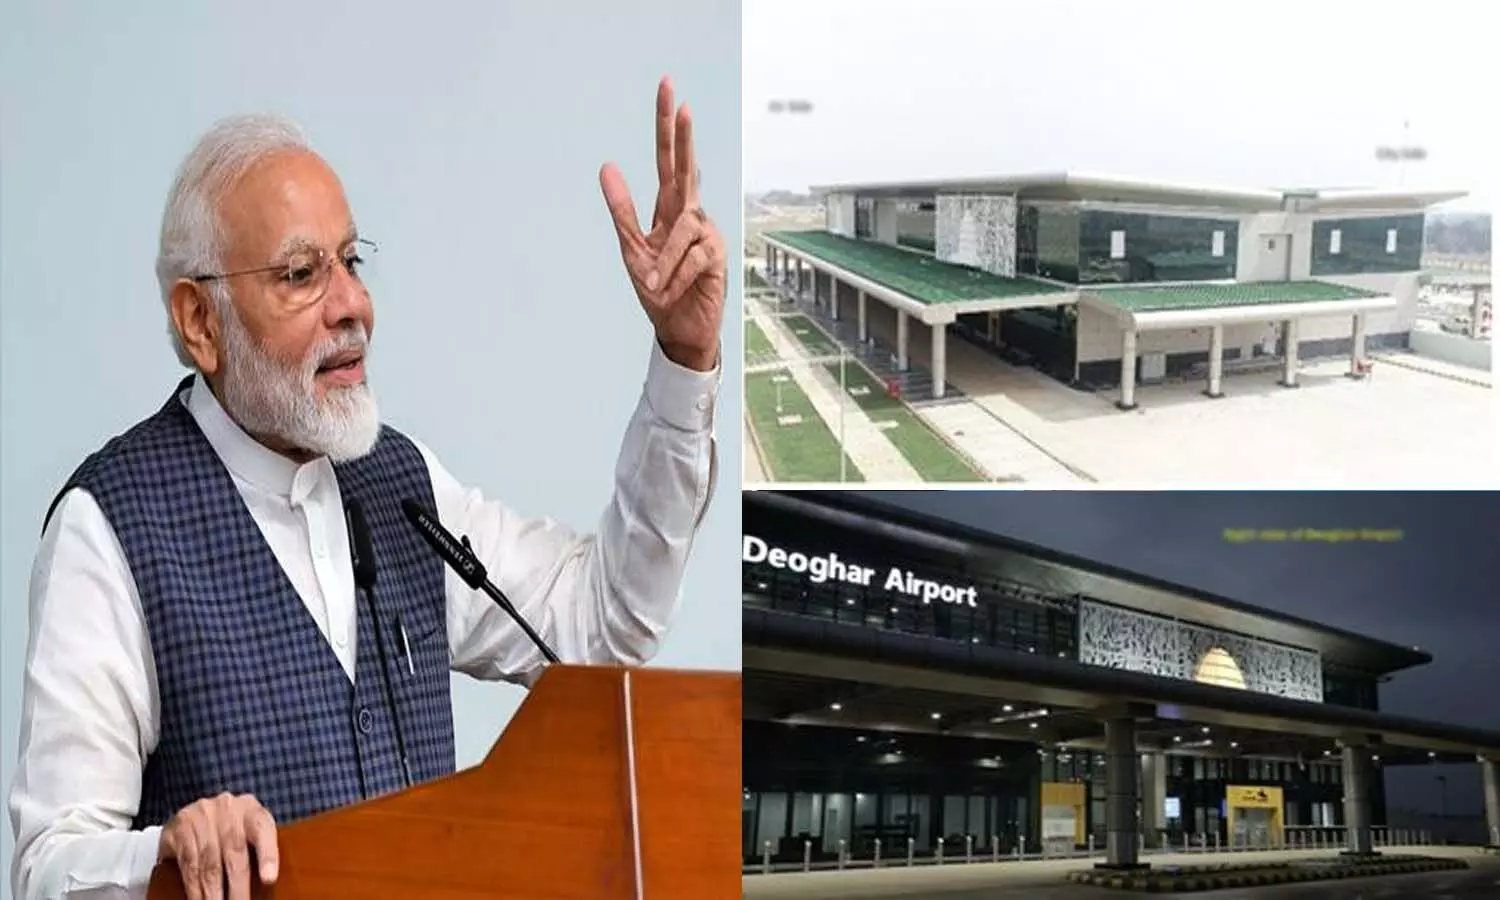 PM Modi will visit Deoghar on July 12, will inaugurate an airport made of 400 crores